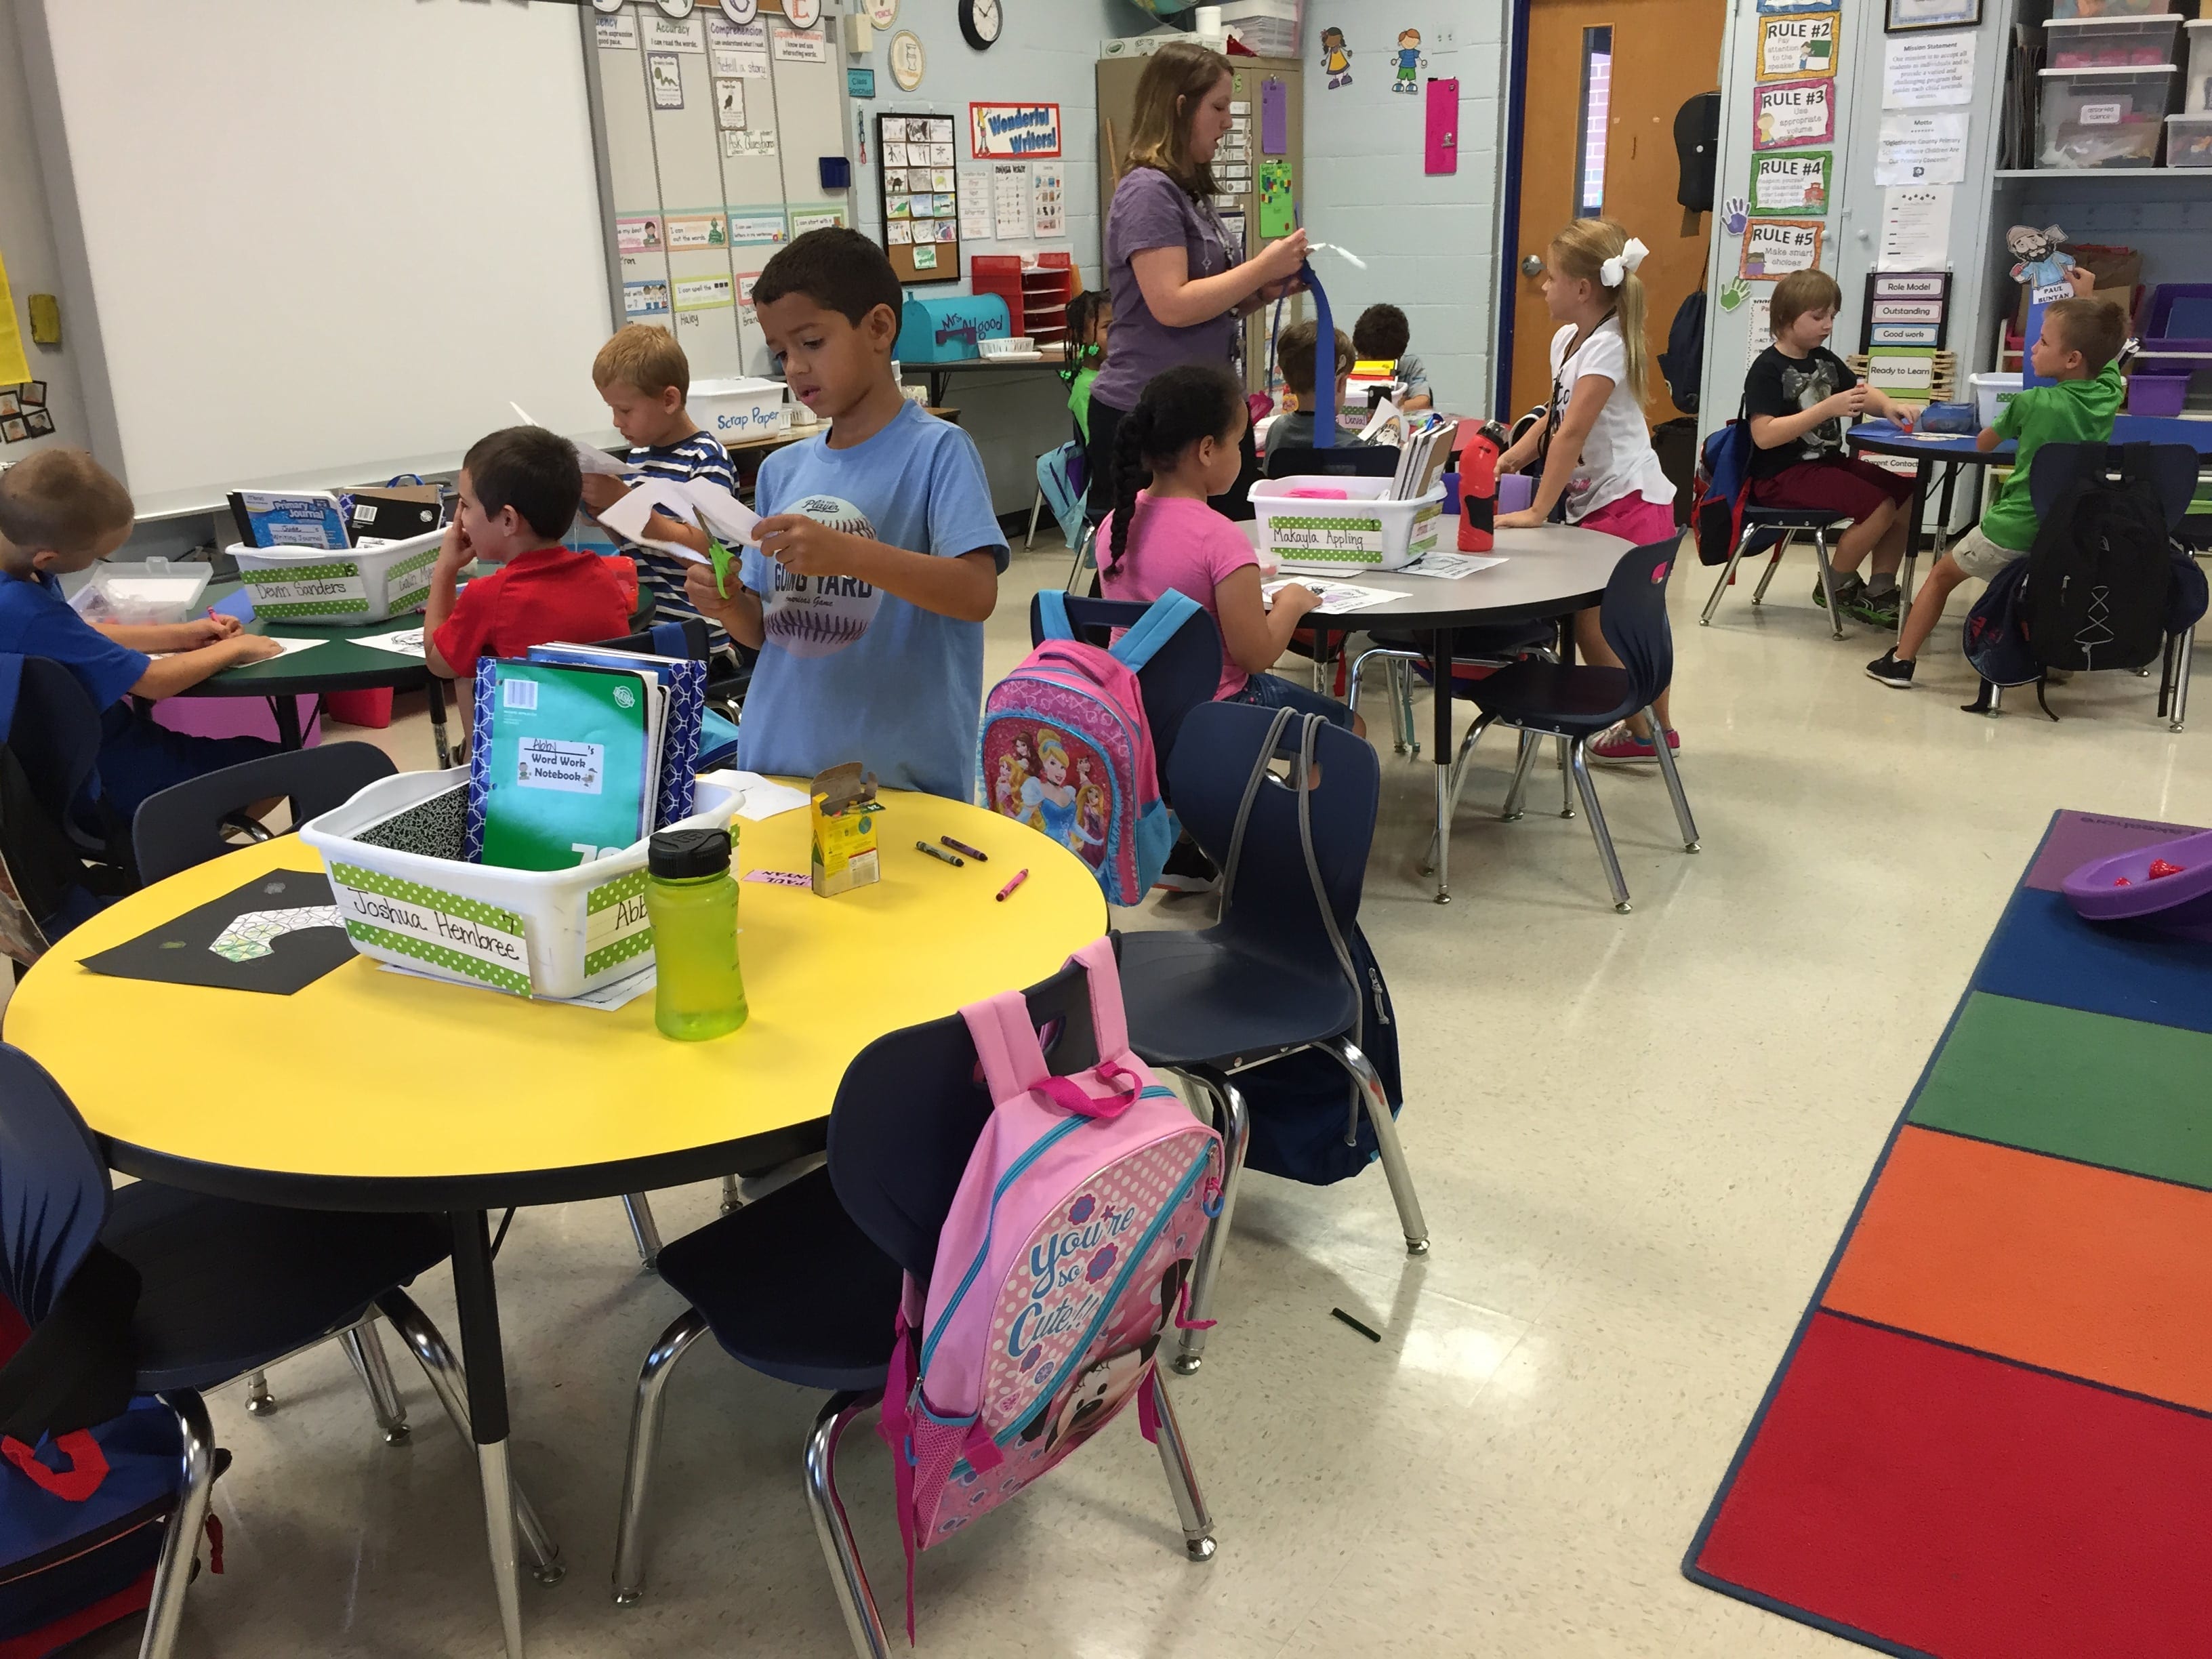 Ms. Allgood's first grade class uses supplies donated through DonorsChoose.